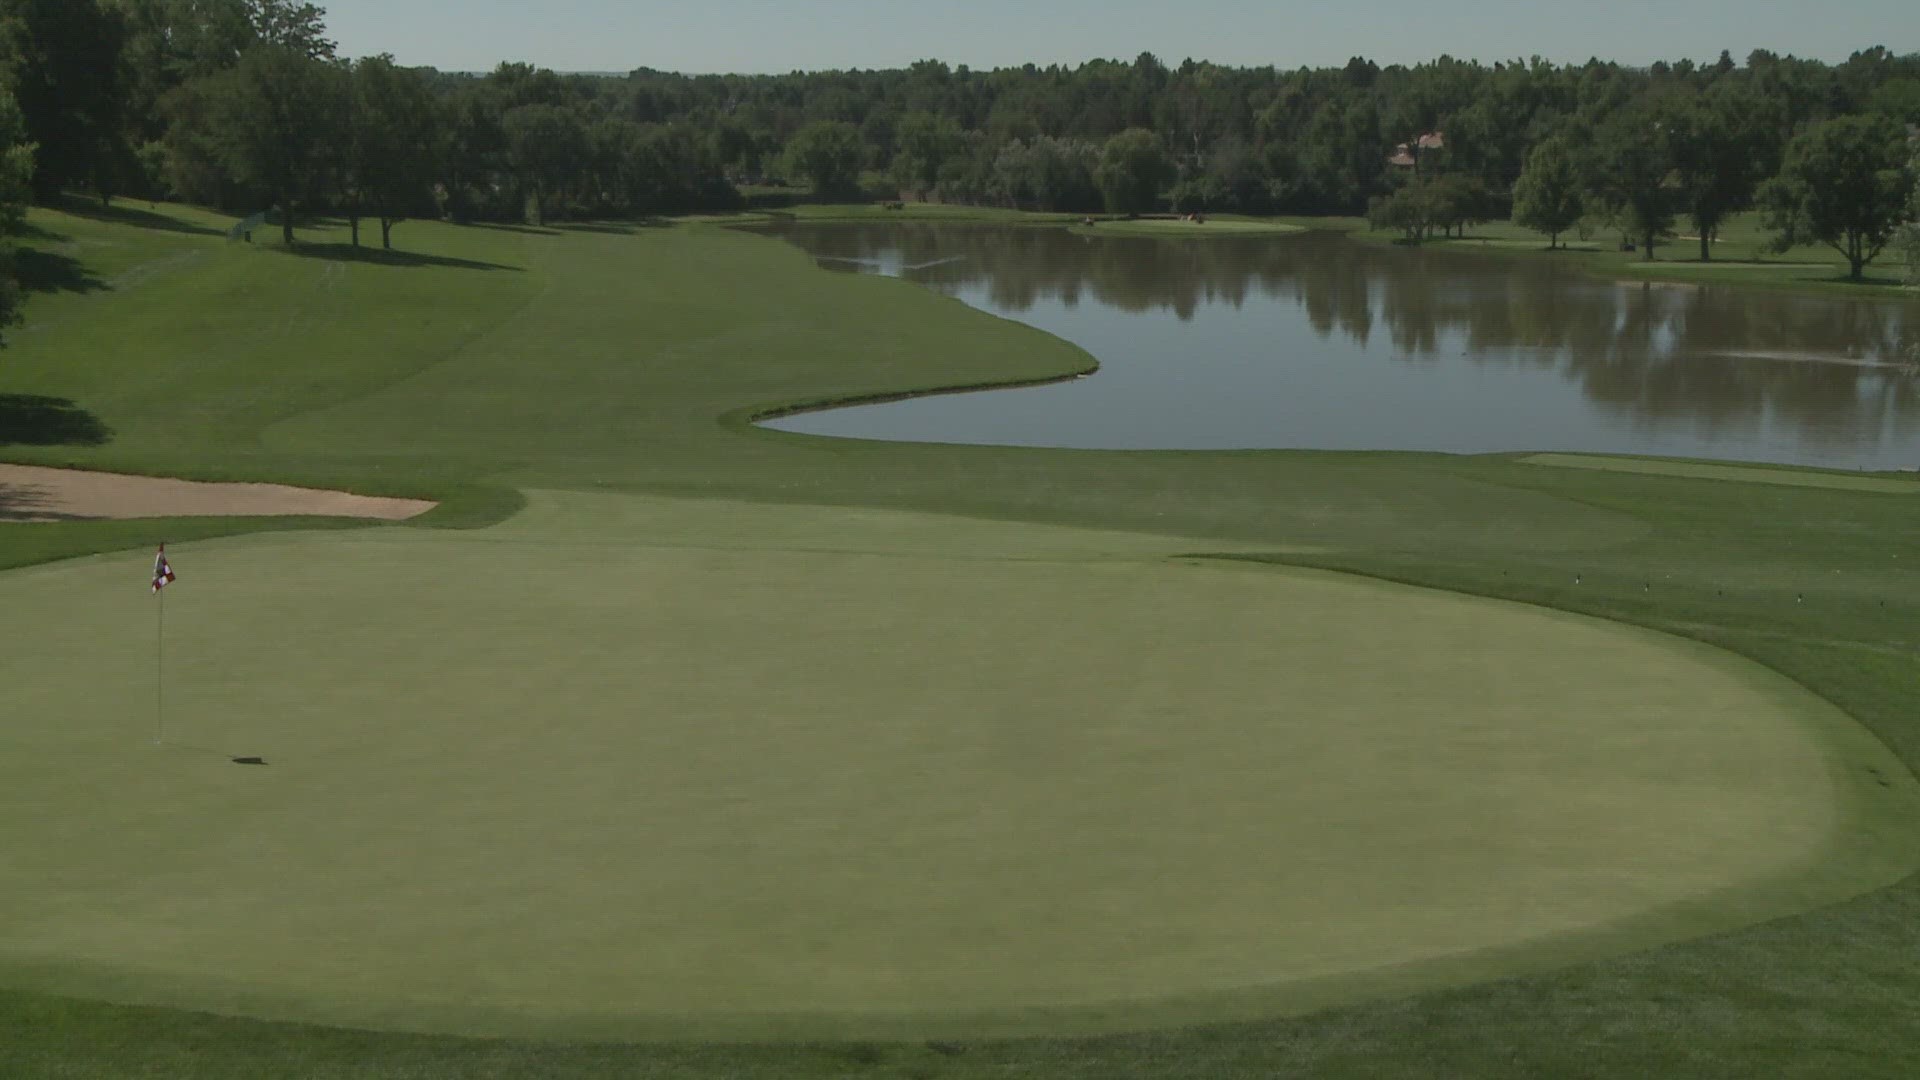 Cherry Hills: Set to host U.S. Amateur Championship in August